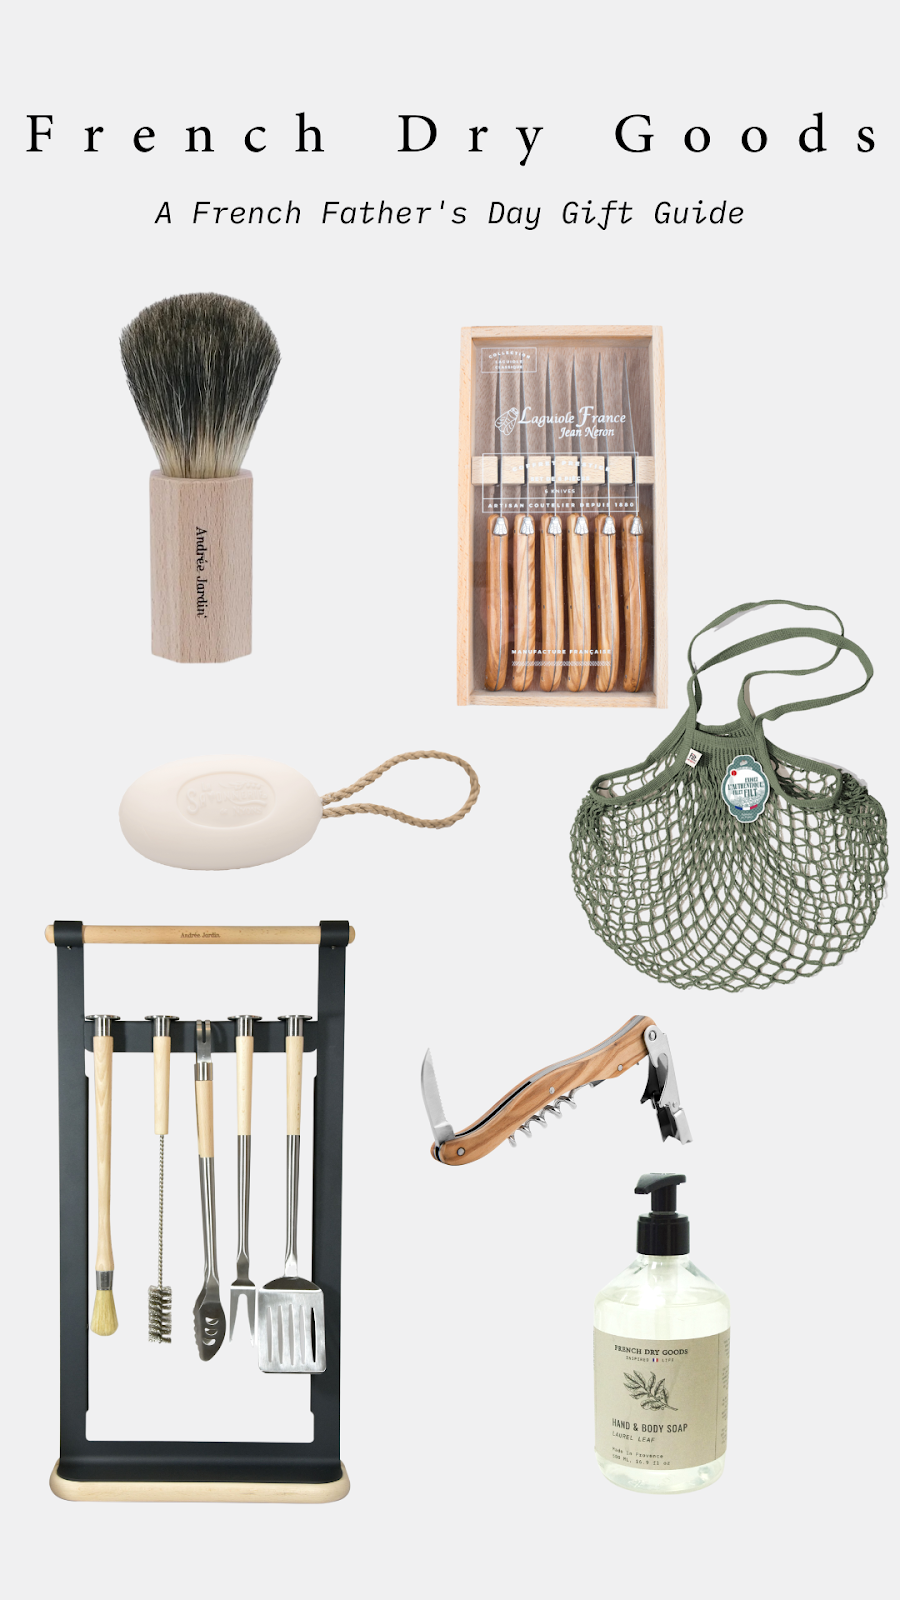 Text reads: French Dry Goods: A French Father's Day Gift Guide. Product photos of shaving brush, set of six knives, net bag, soap with rope, bbq set, corkscrew, and liquid soap.